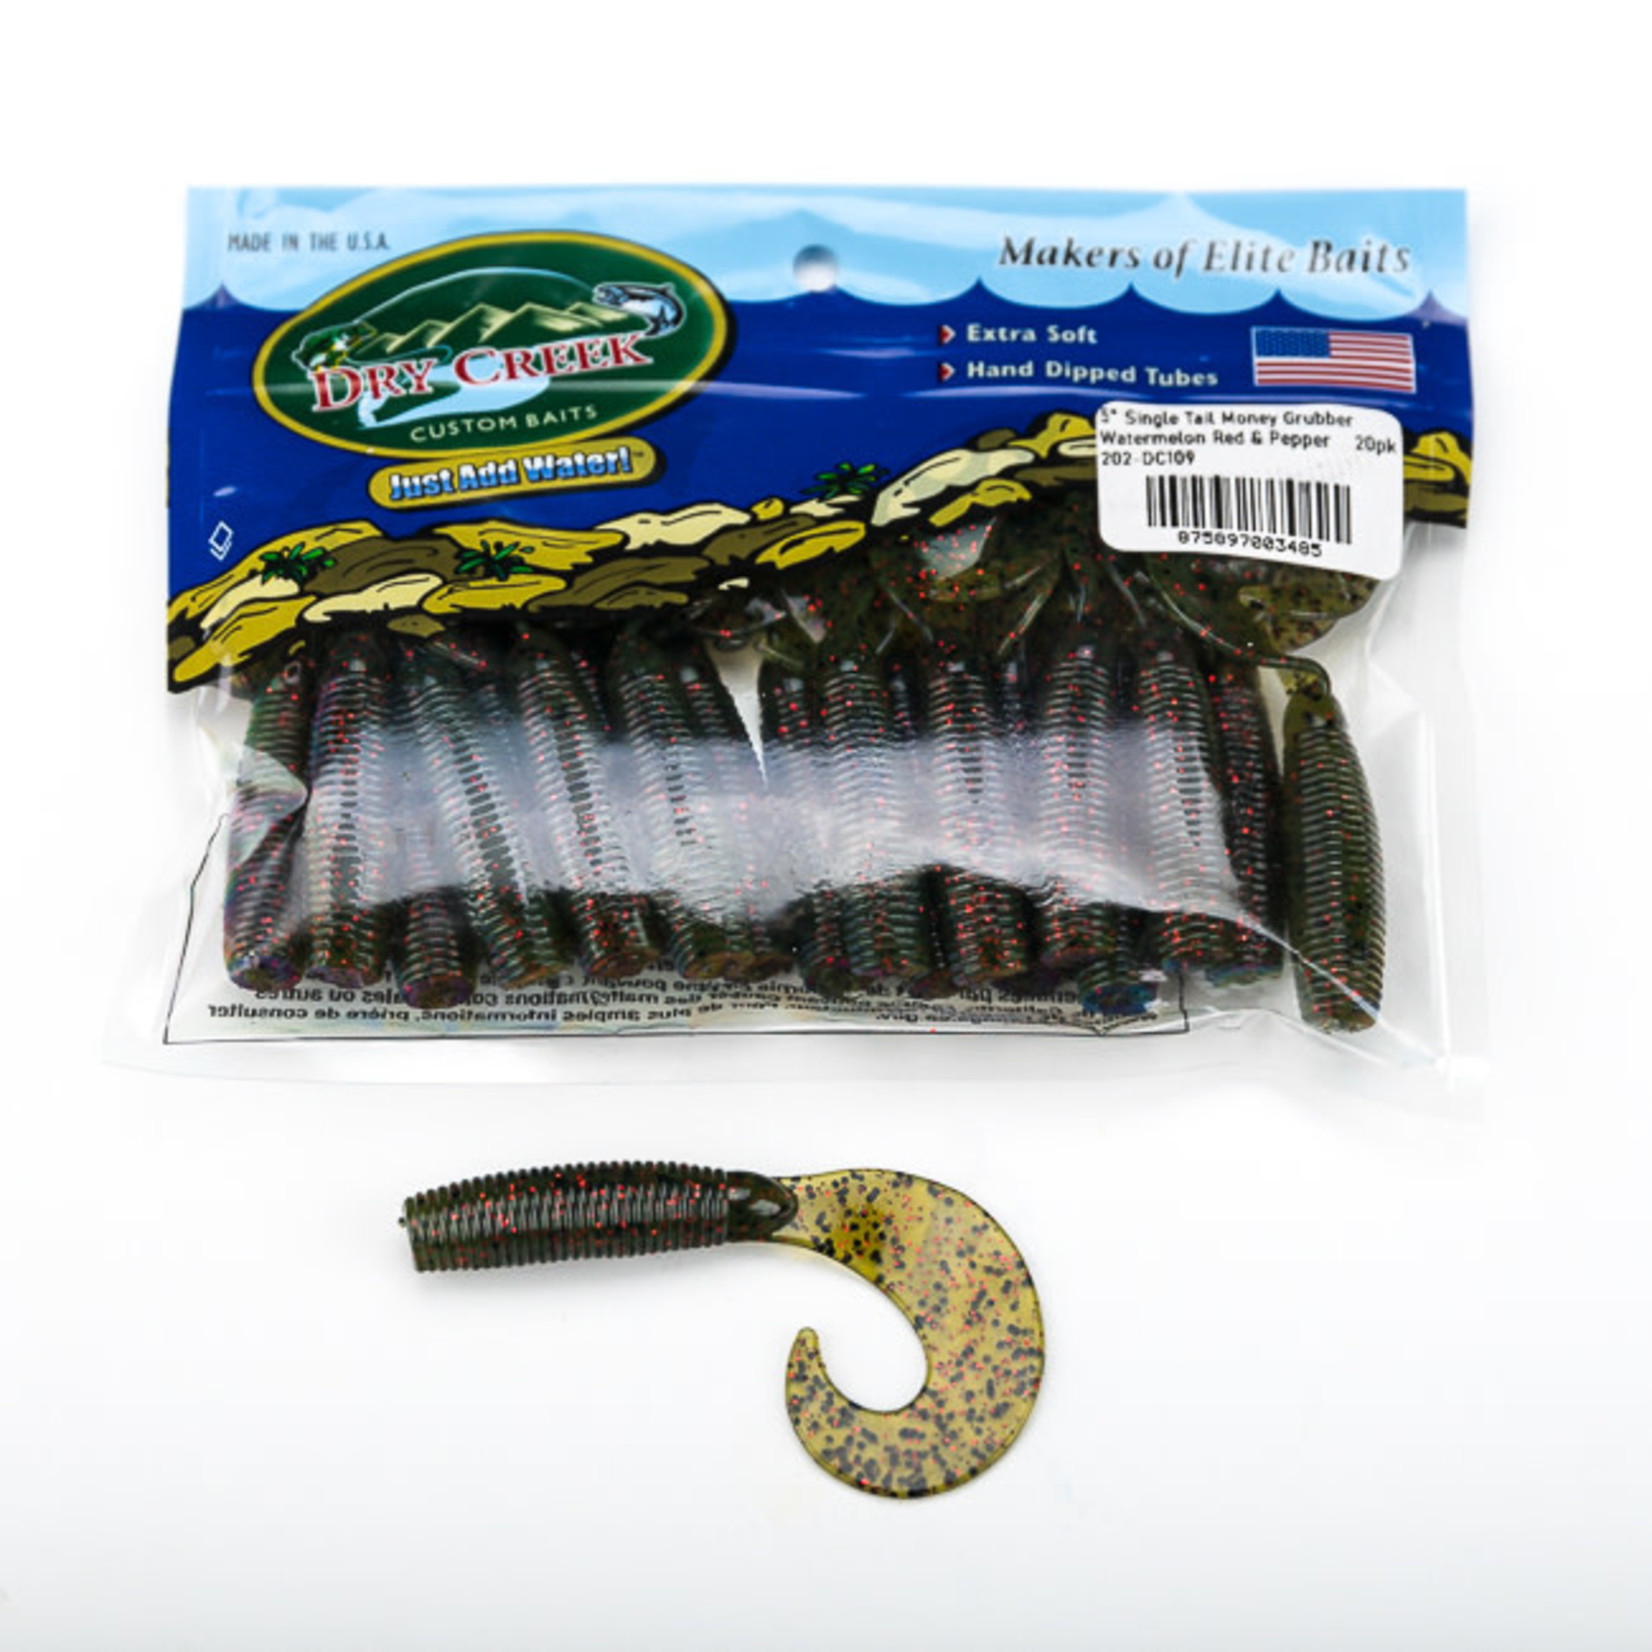 Dry Creek Dry Creek 5" Single Tail Money Grubber, Watermelon Red and Pepper, 20pk